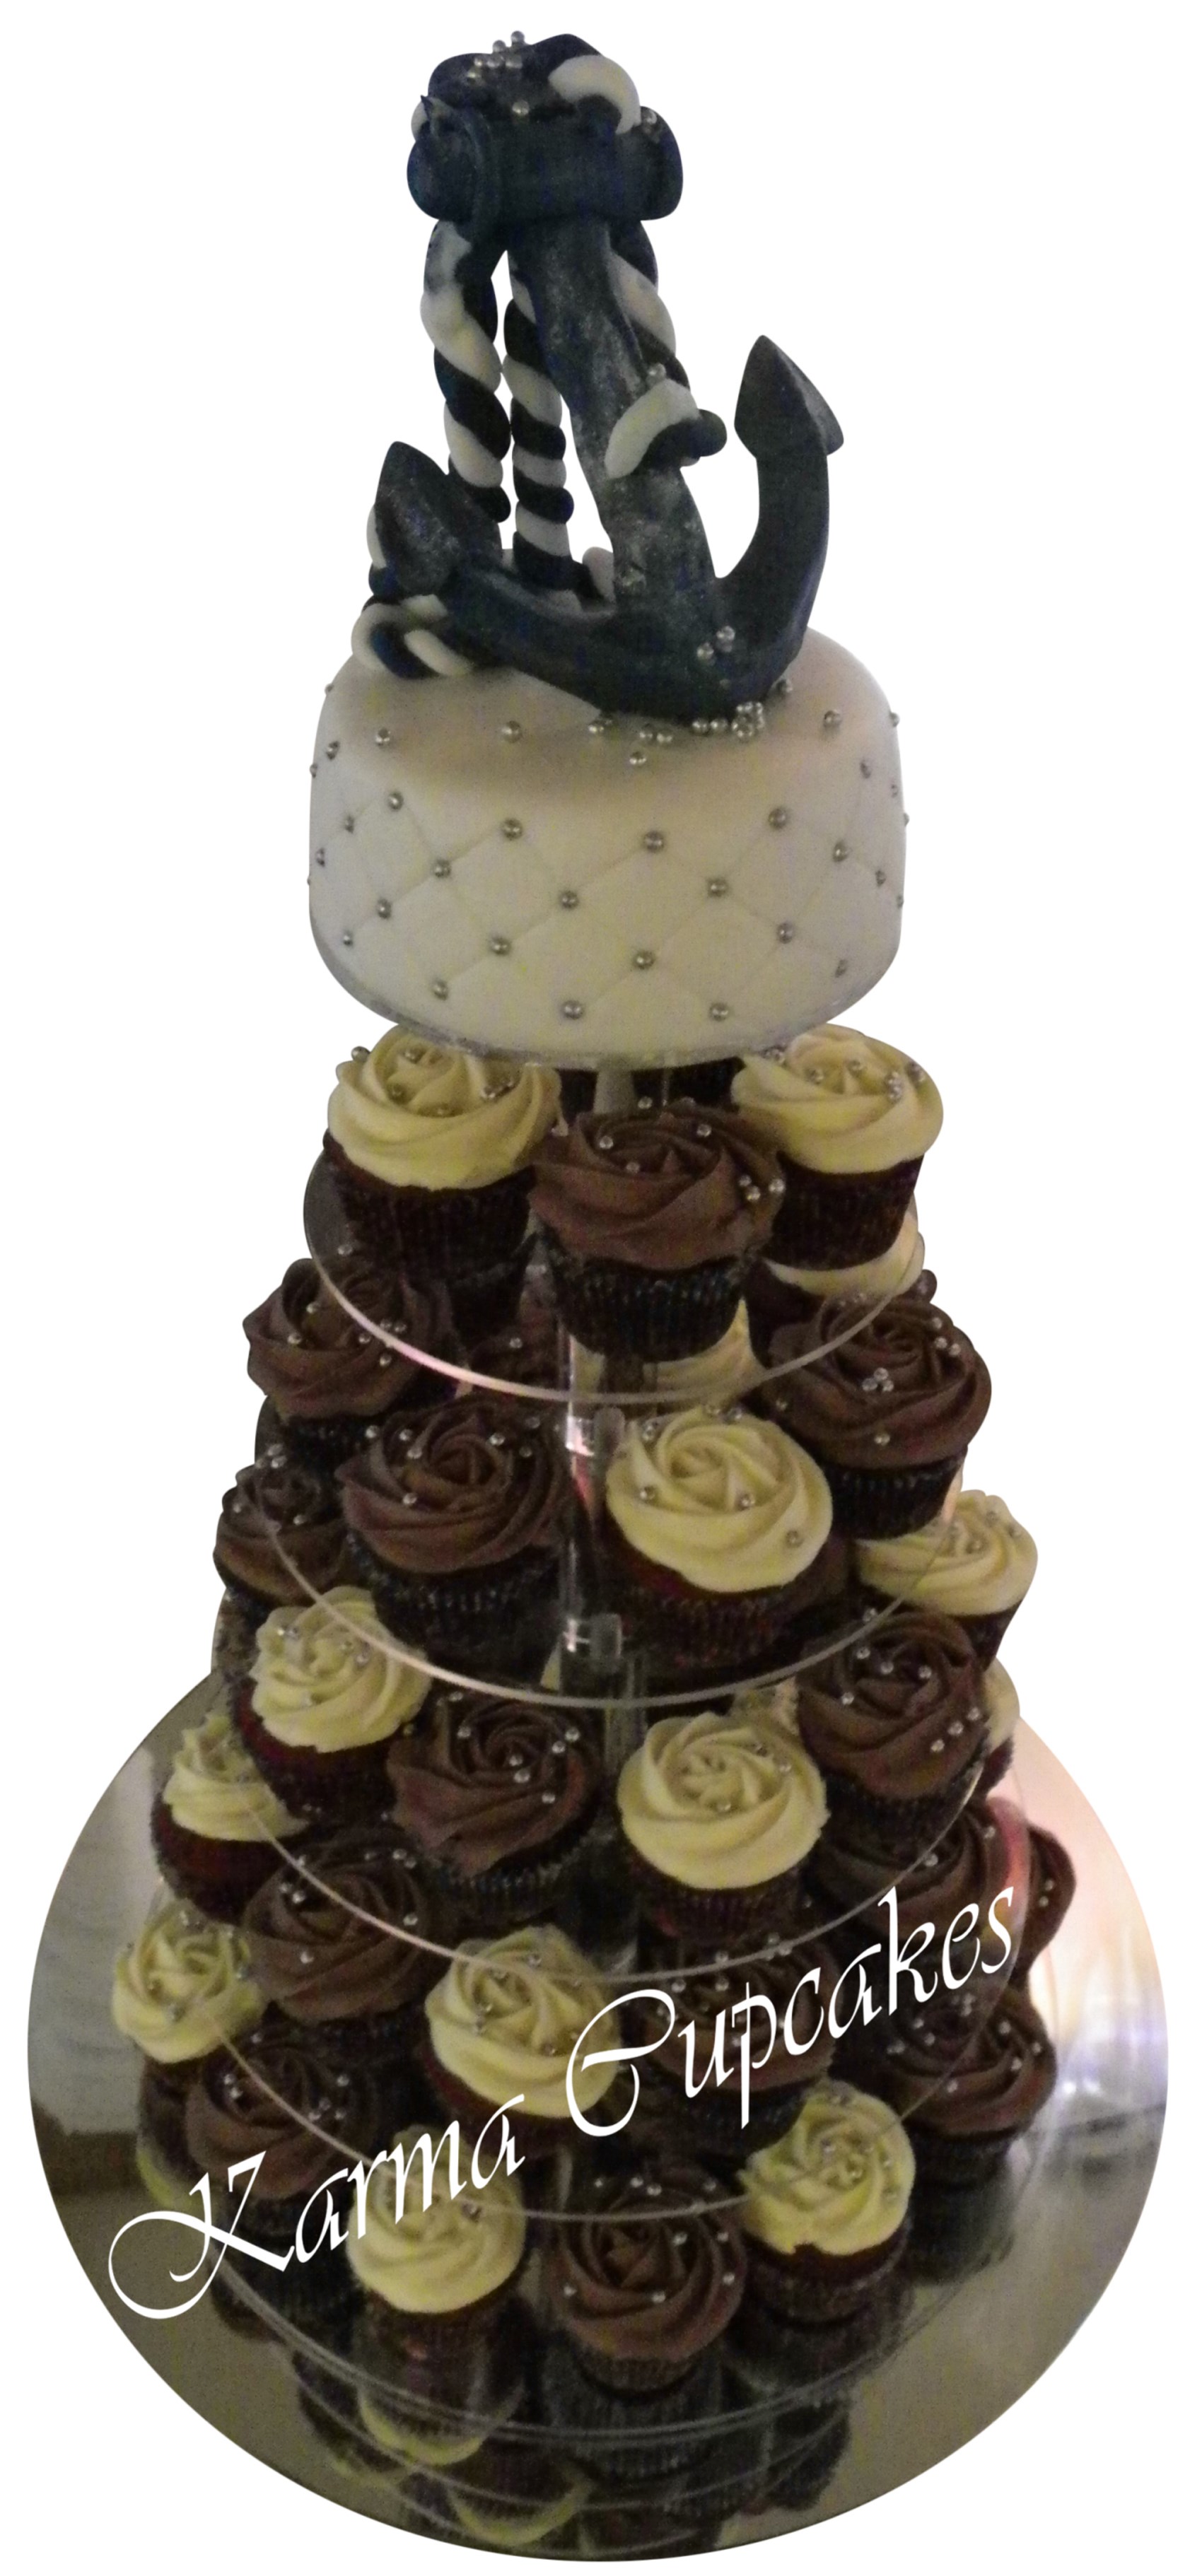 Cupcake Tower with Anchor Cake